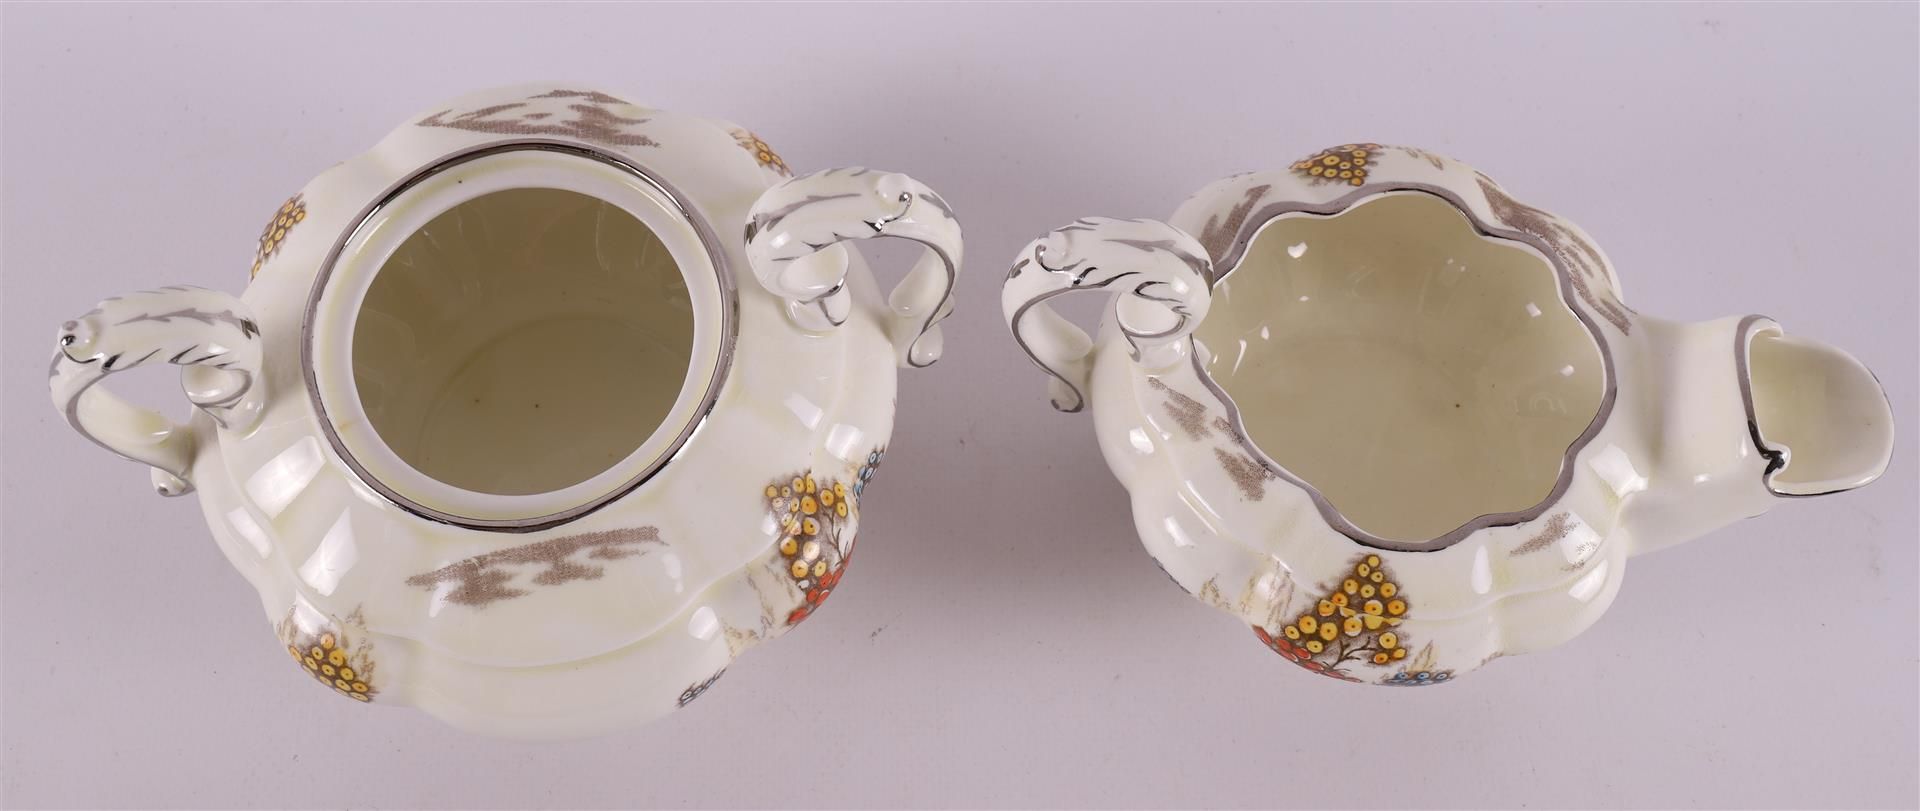 A creamware teapot with sugar bowl and milk jug, England, Stafford, 20th century - Image 9 of 12